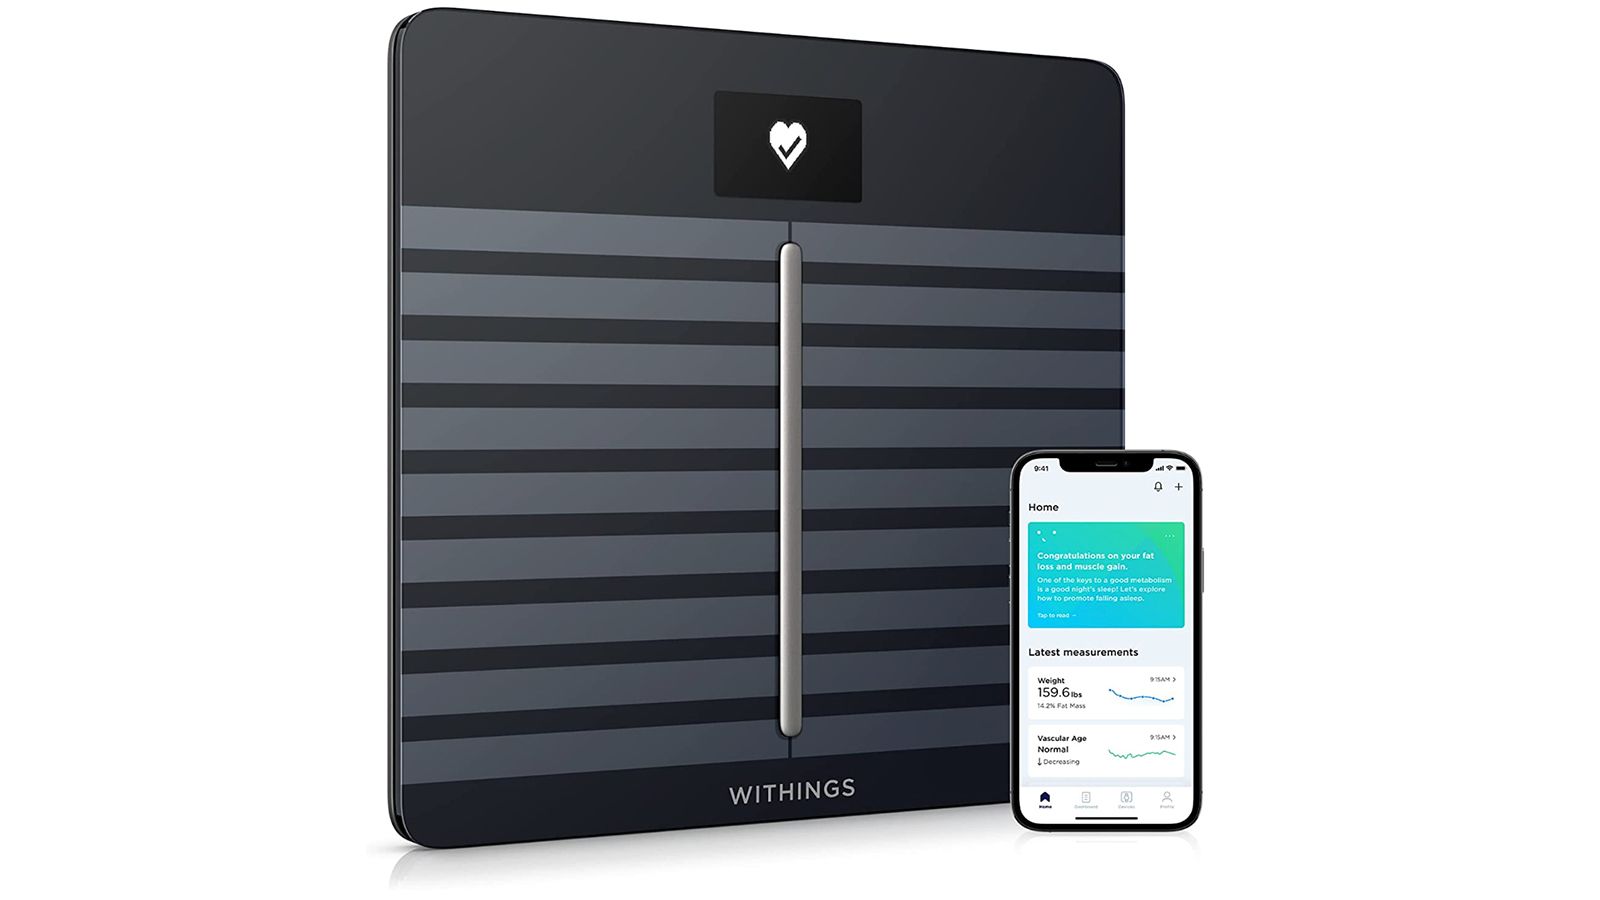 Withings adds Vascular Age feature to its Body Cardio scale - 9to5Mac